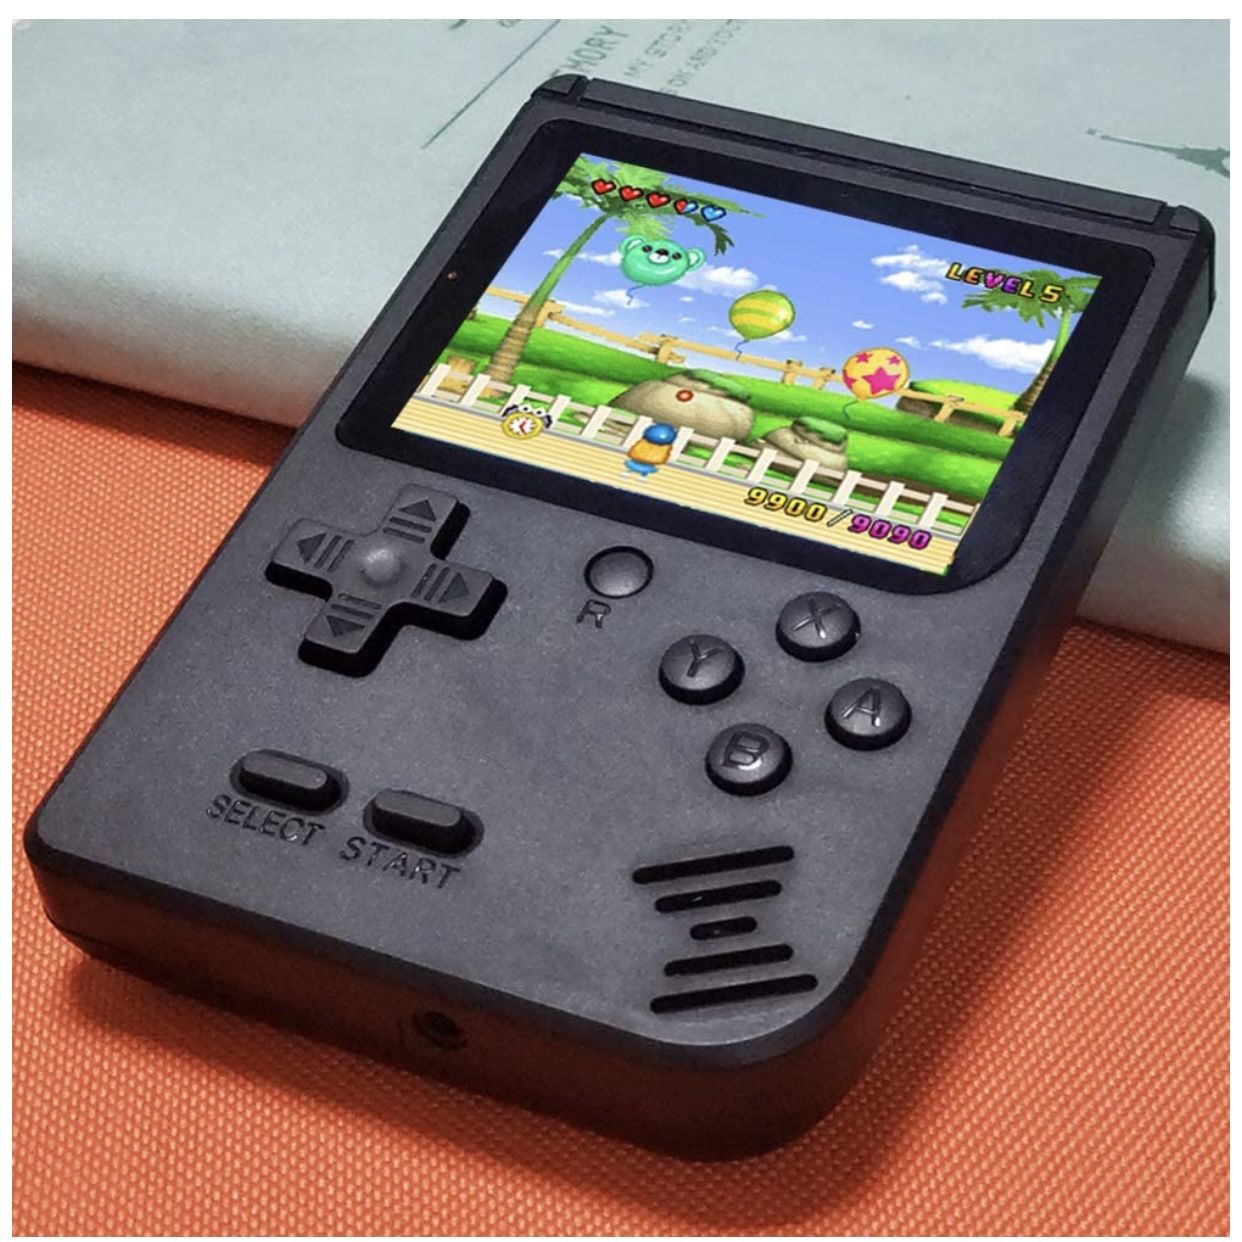 Handheld Games Console for Kids, Retro FC Arcade Video Gaming System Built-in 400 Classic Old School